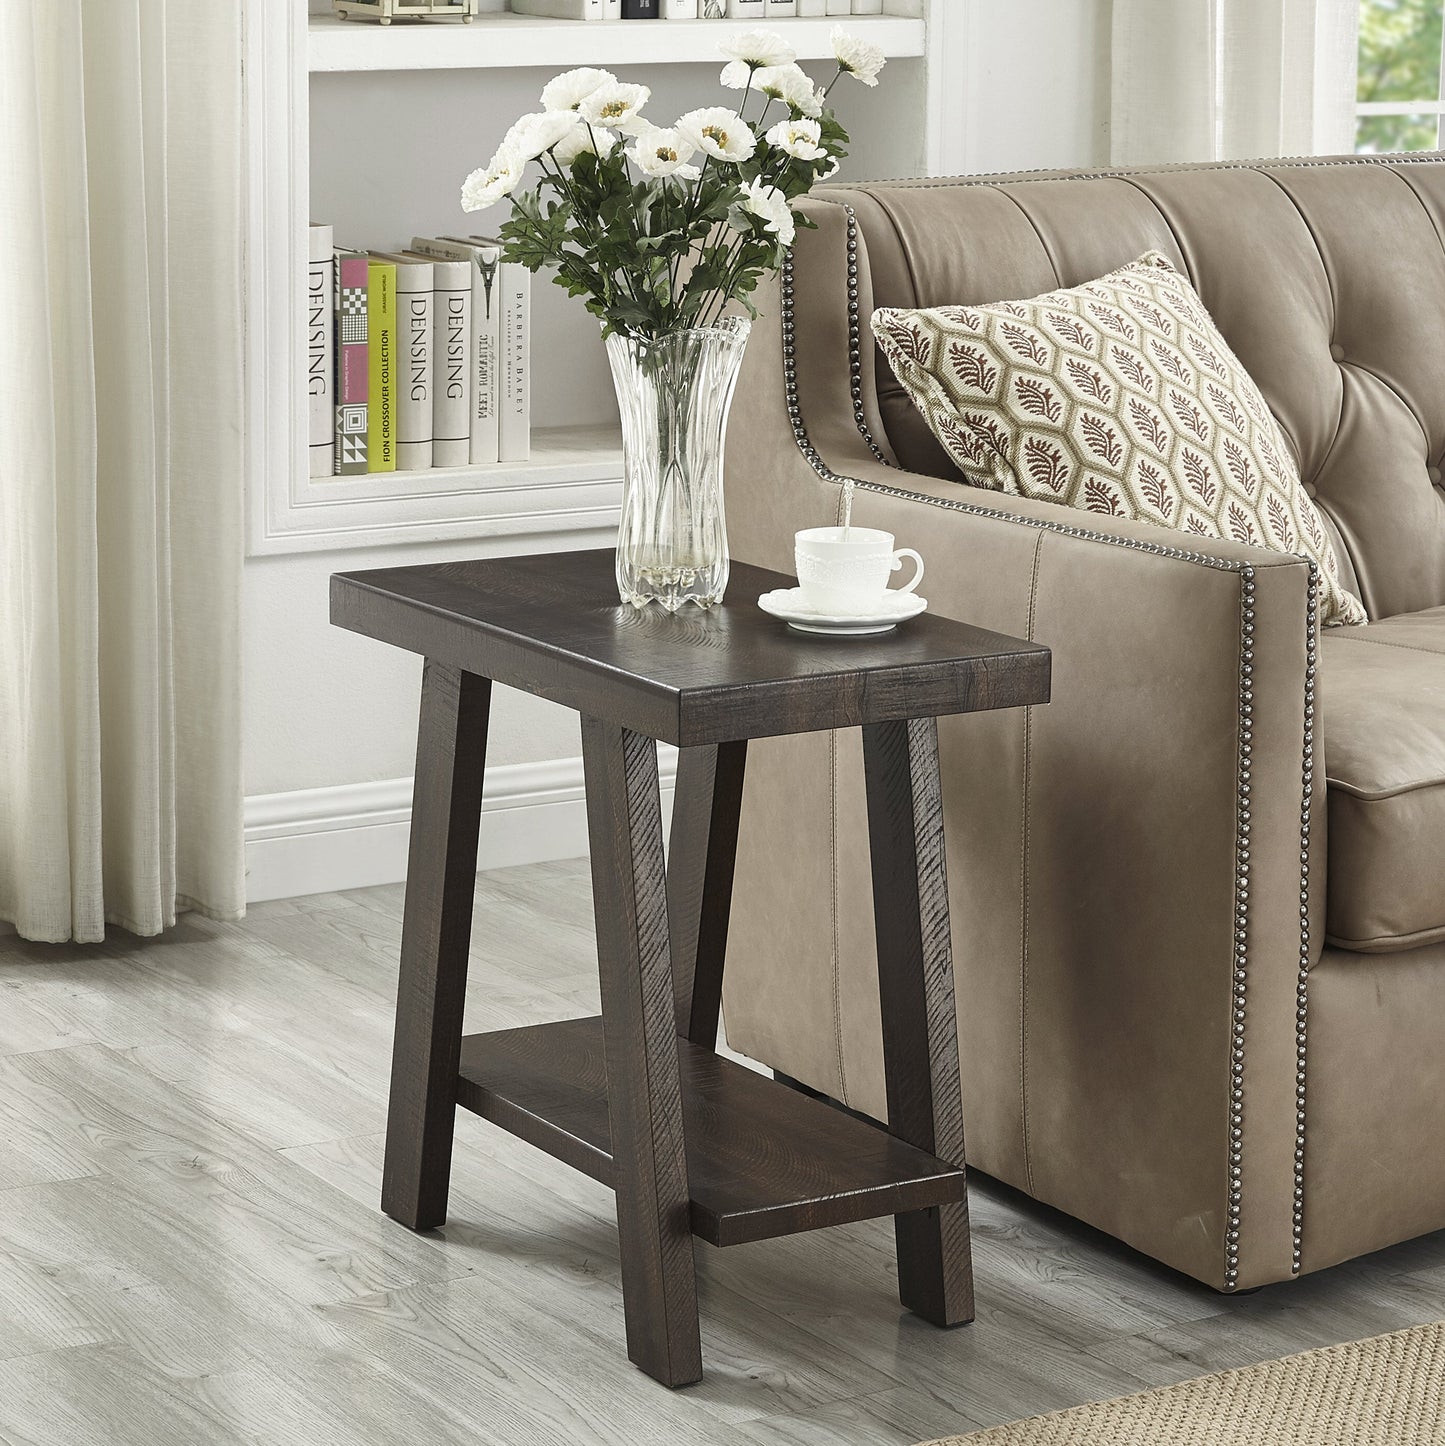 Athens Contemporary Wood Shelf Side Table in Weathered Espresso